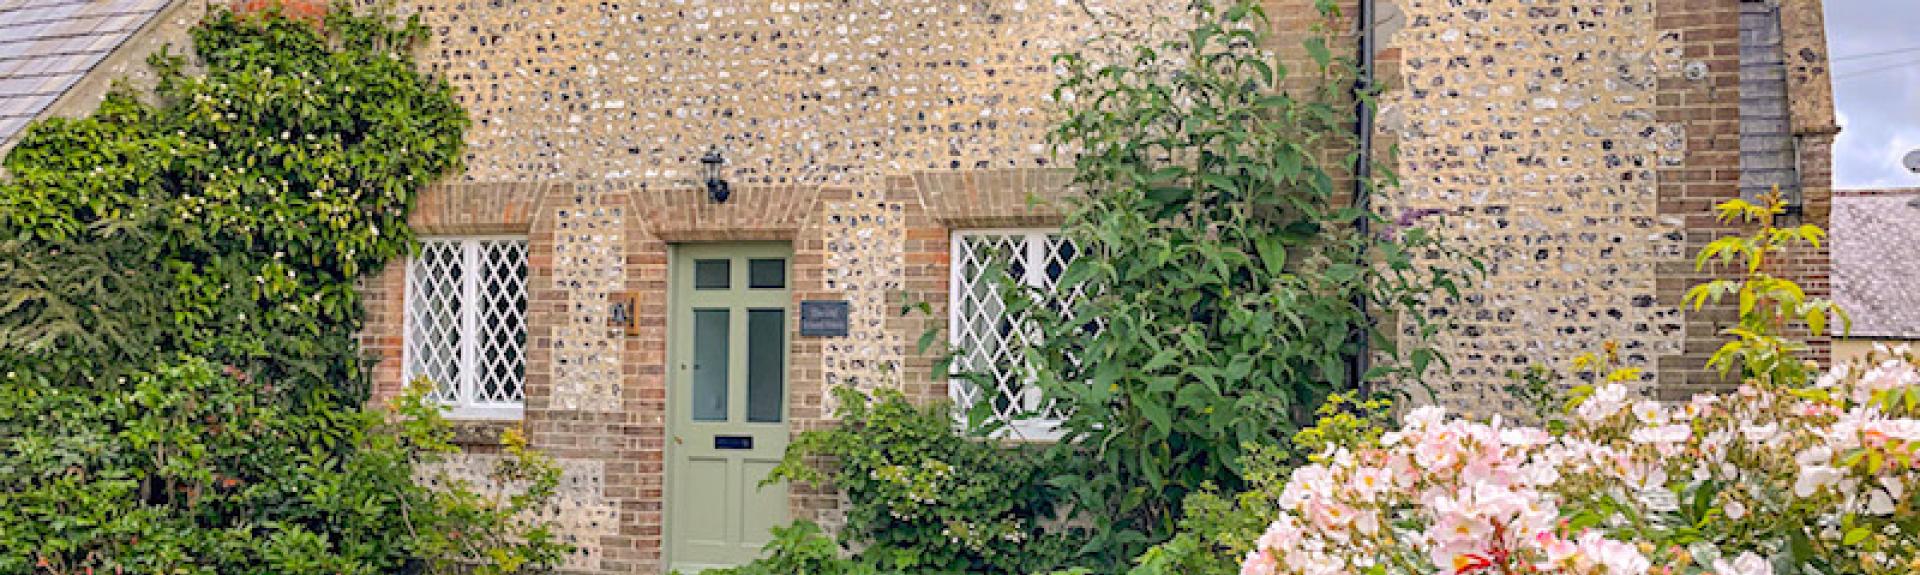 Gable end of a stone-built Dorset holiday cottage overlooking a shrub-filled front garden.